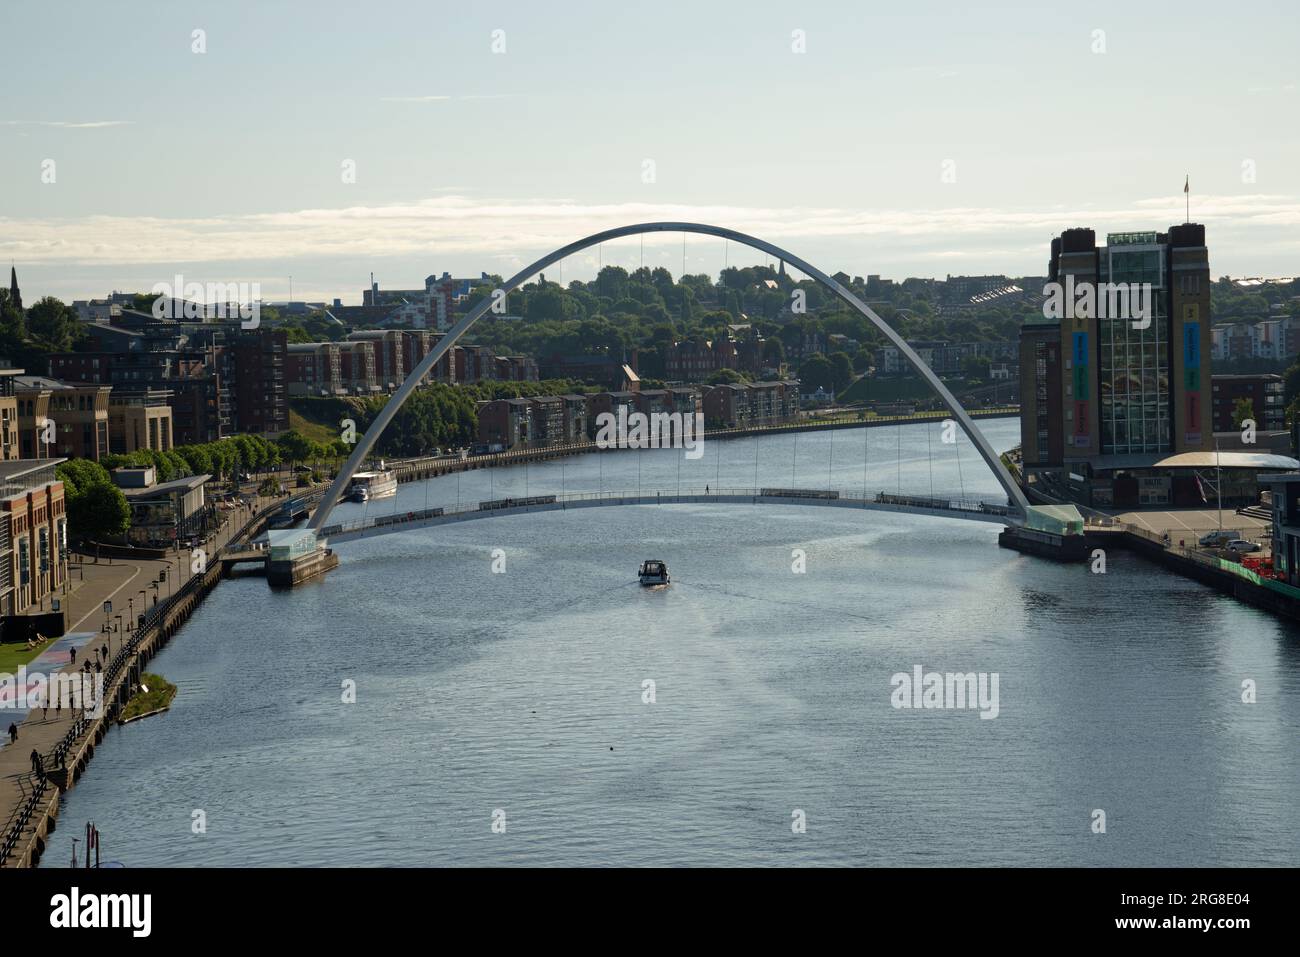 The river Tyne at Newcastle with the Gateshead Millennium Bridge in the distance. It has a pedestrian and cycling path on the bridge only. Stock Photo